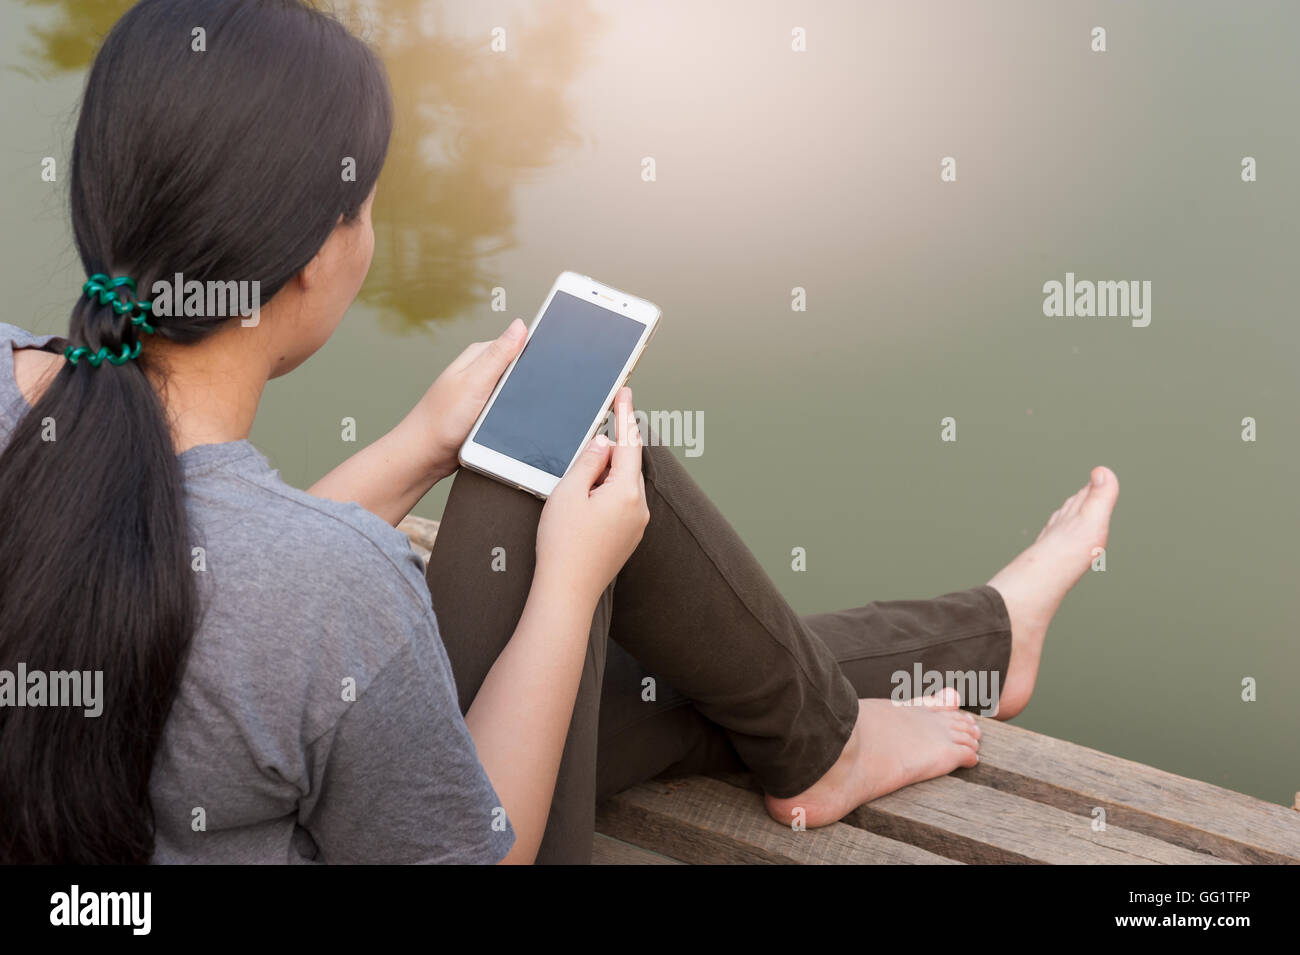 Weekend morning lifestyle. Young woman using her mobile phone seriously while sitting outdoor beside river in morning time. Stock Photo